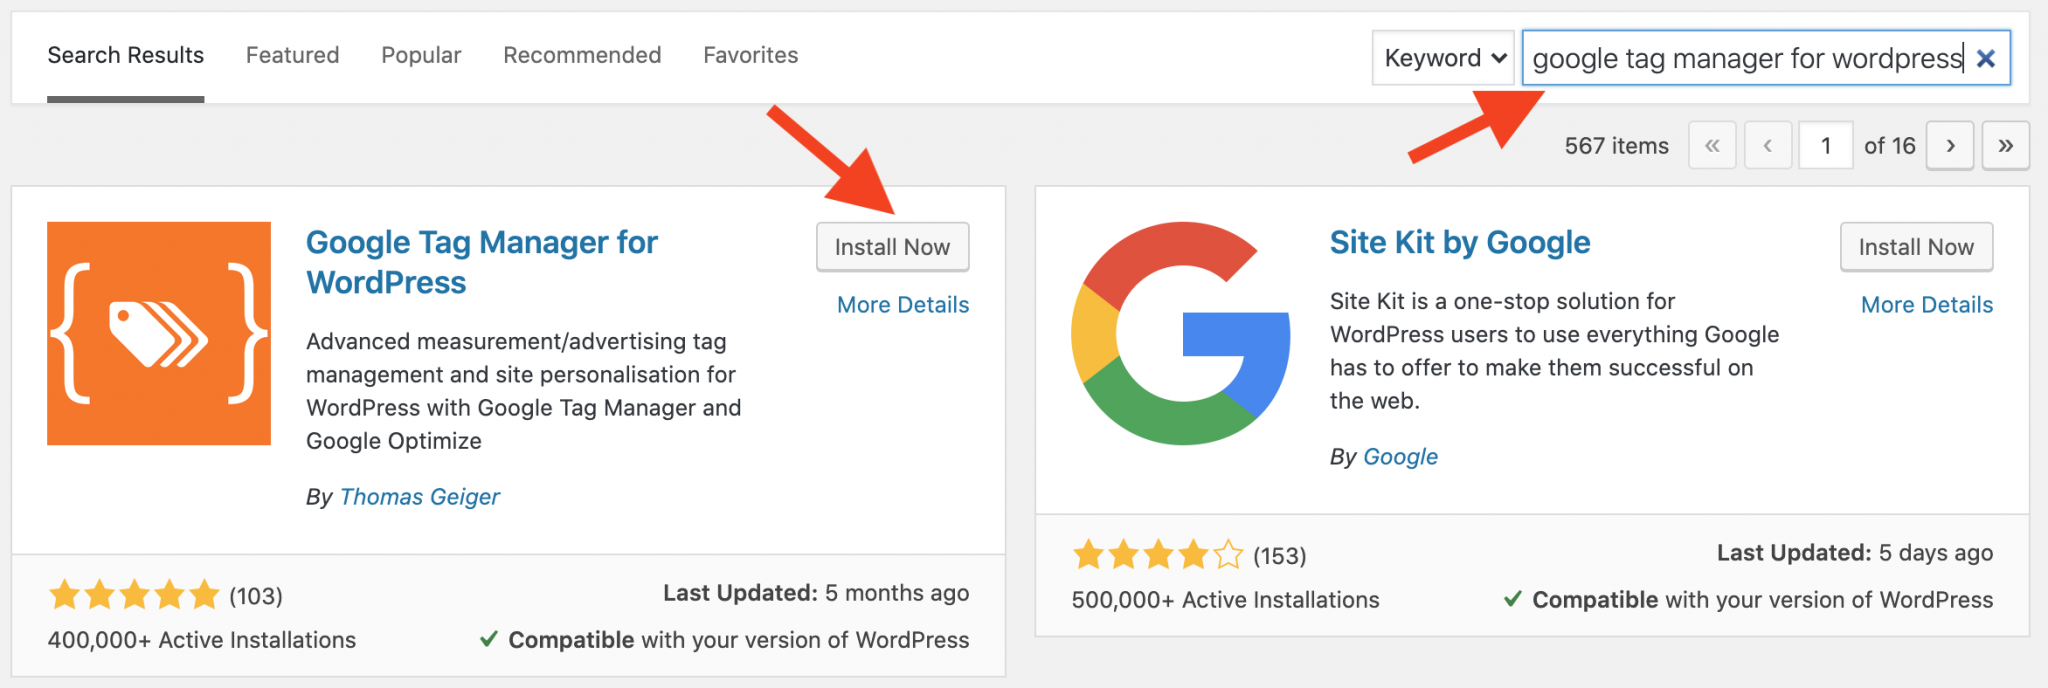 how to install Google Tag Manager for WordPress plugin on your wordpress website